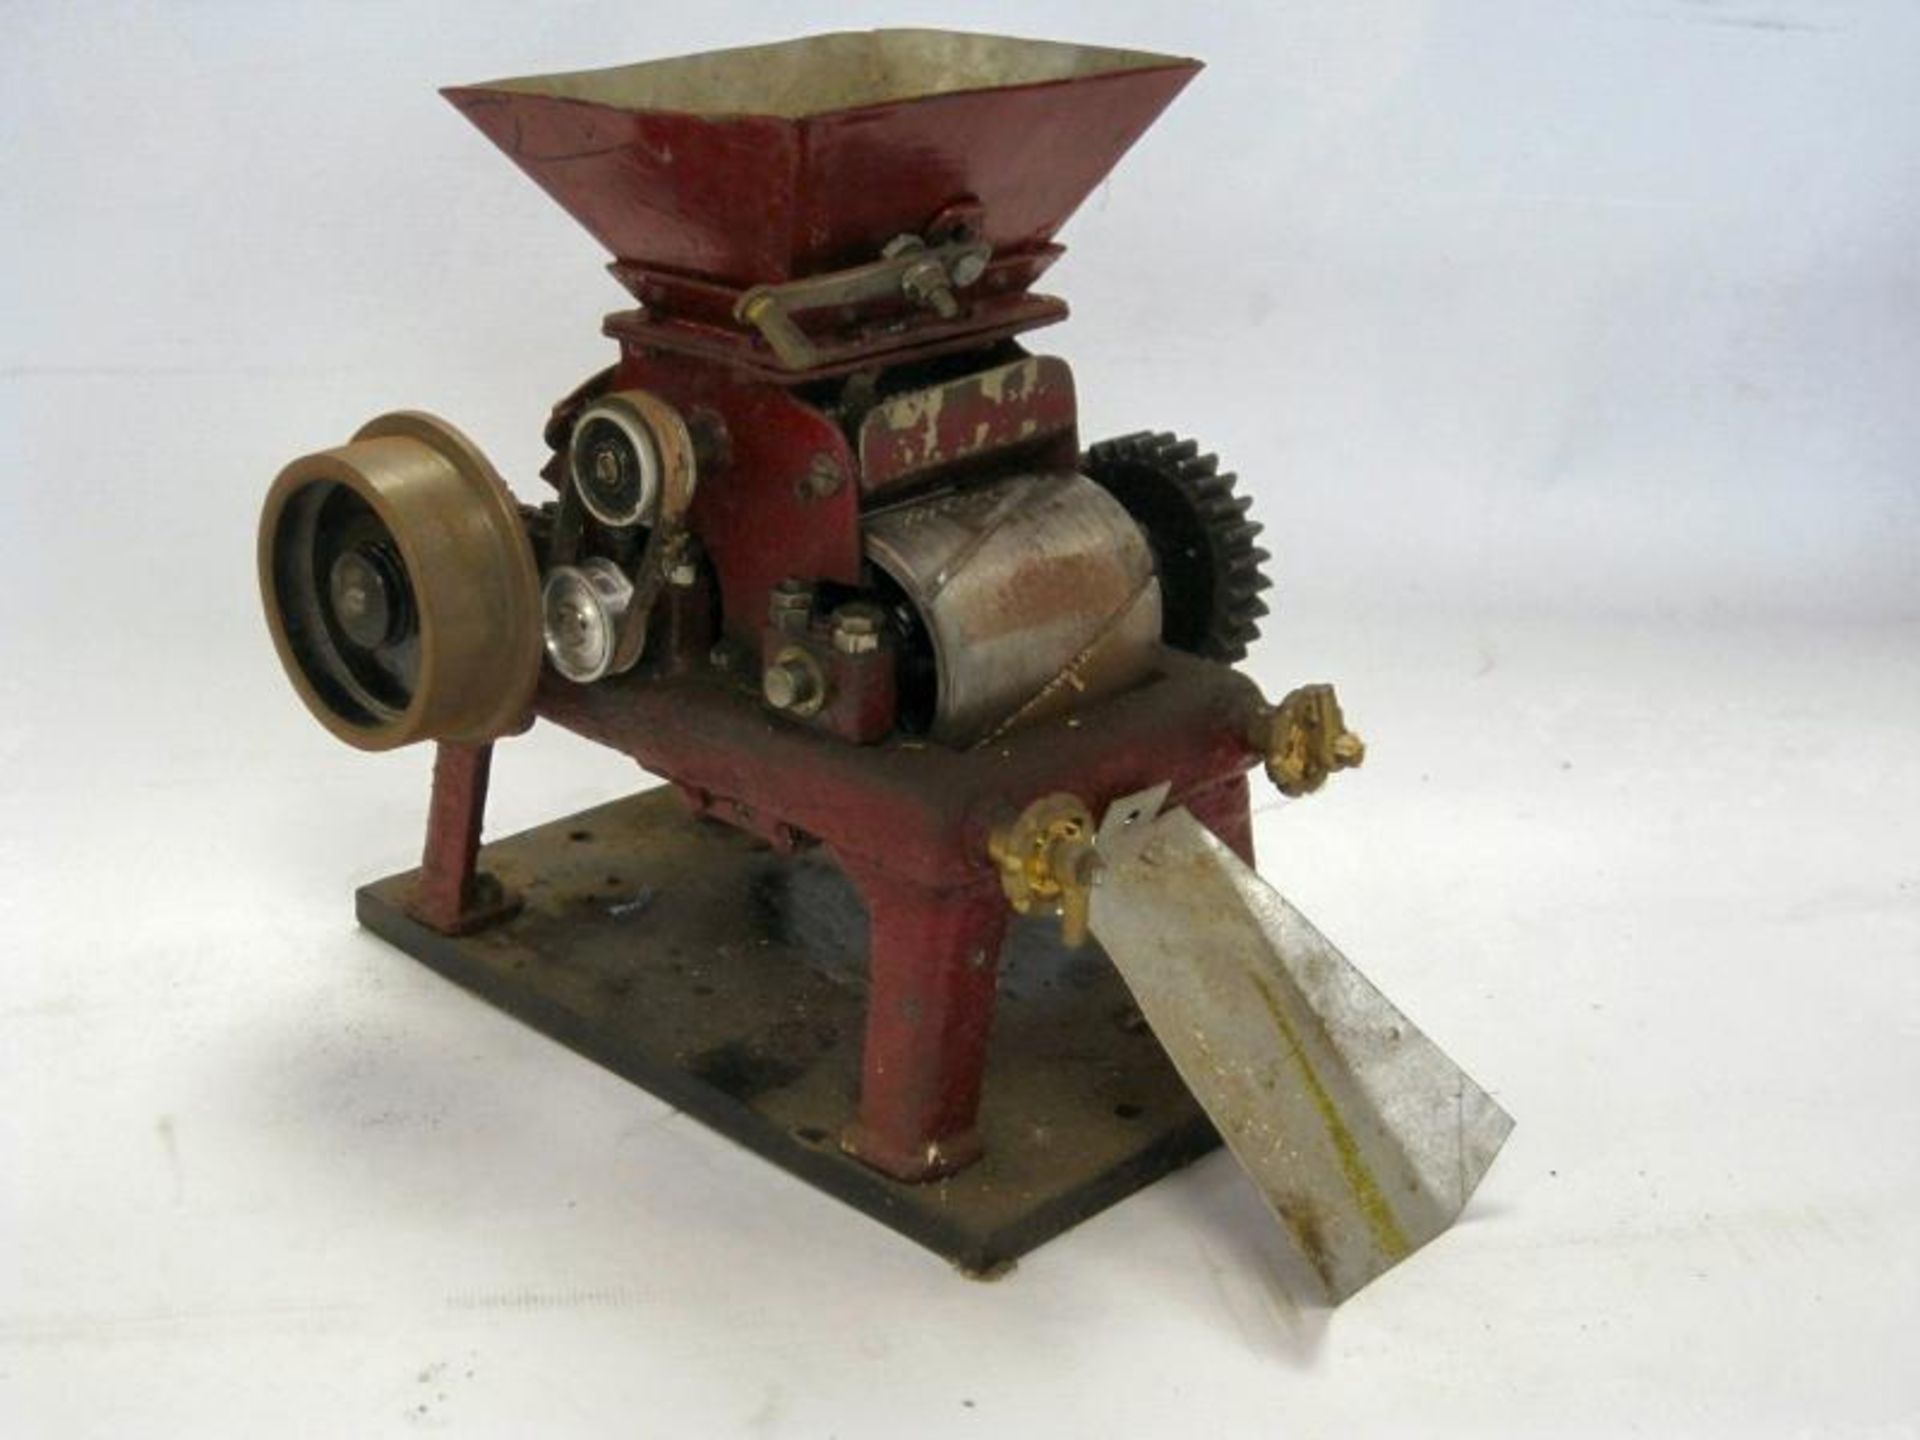 Richard & Chandler scale model roller mill, fully adjustable 10 x 8 x 6 inches